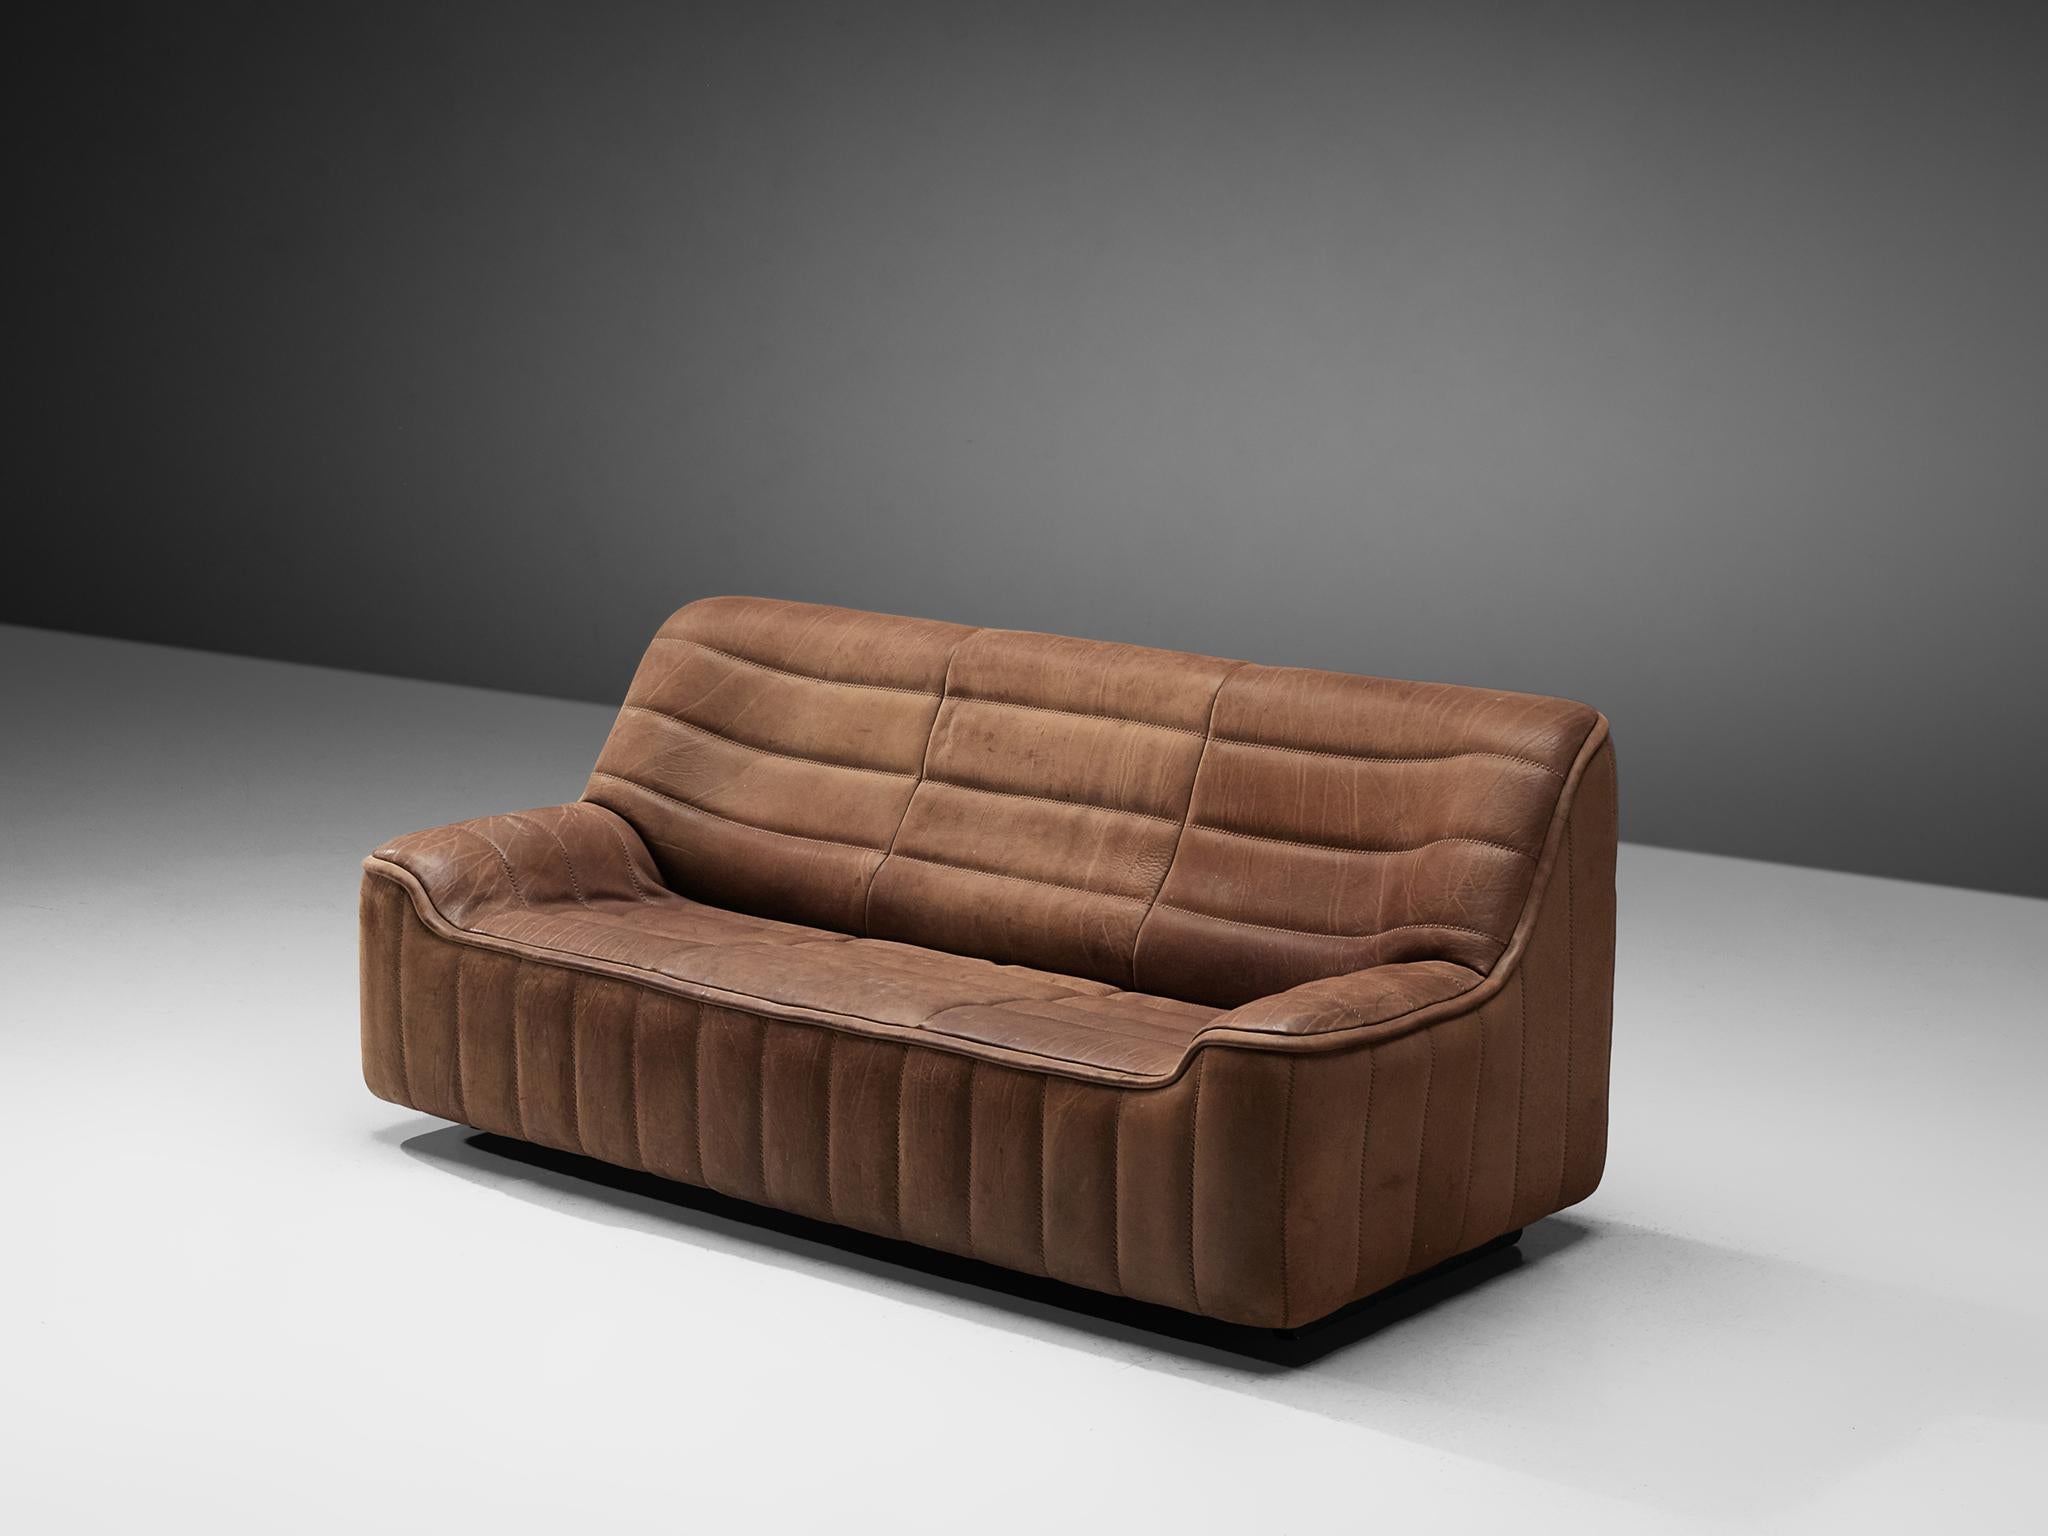 De Sede, 'DS84' sofa, leather, Switzerland, 1970s.

Highly comfortable DS84 settee in brown leather by De Sede. The design is simplistic, yet very modern. This model features a solid base with a bulky seat and a high back. The armrests flow over